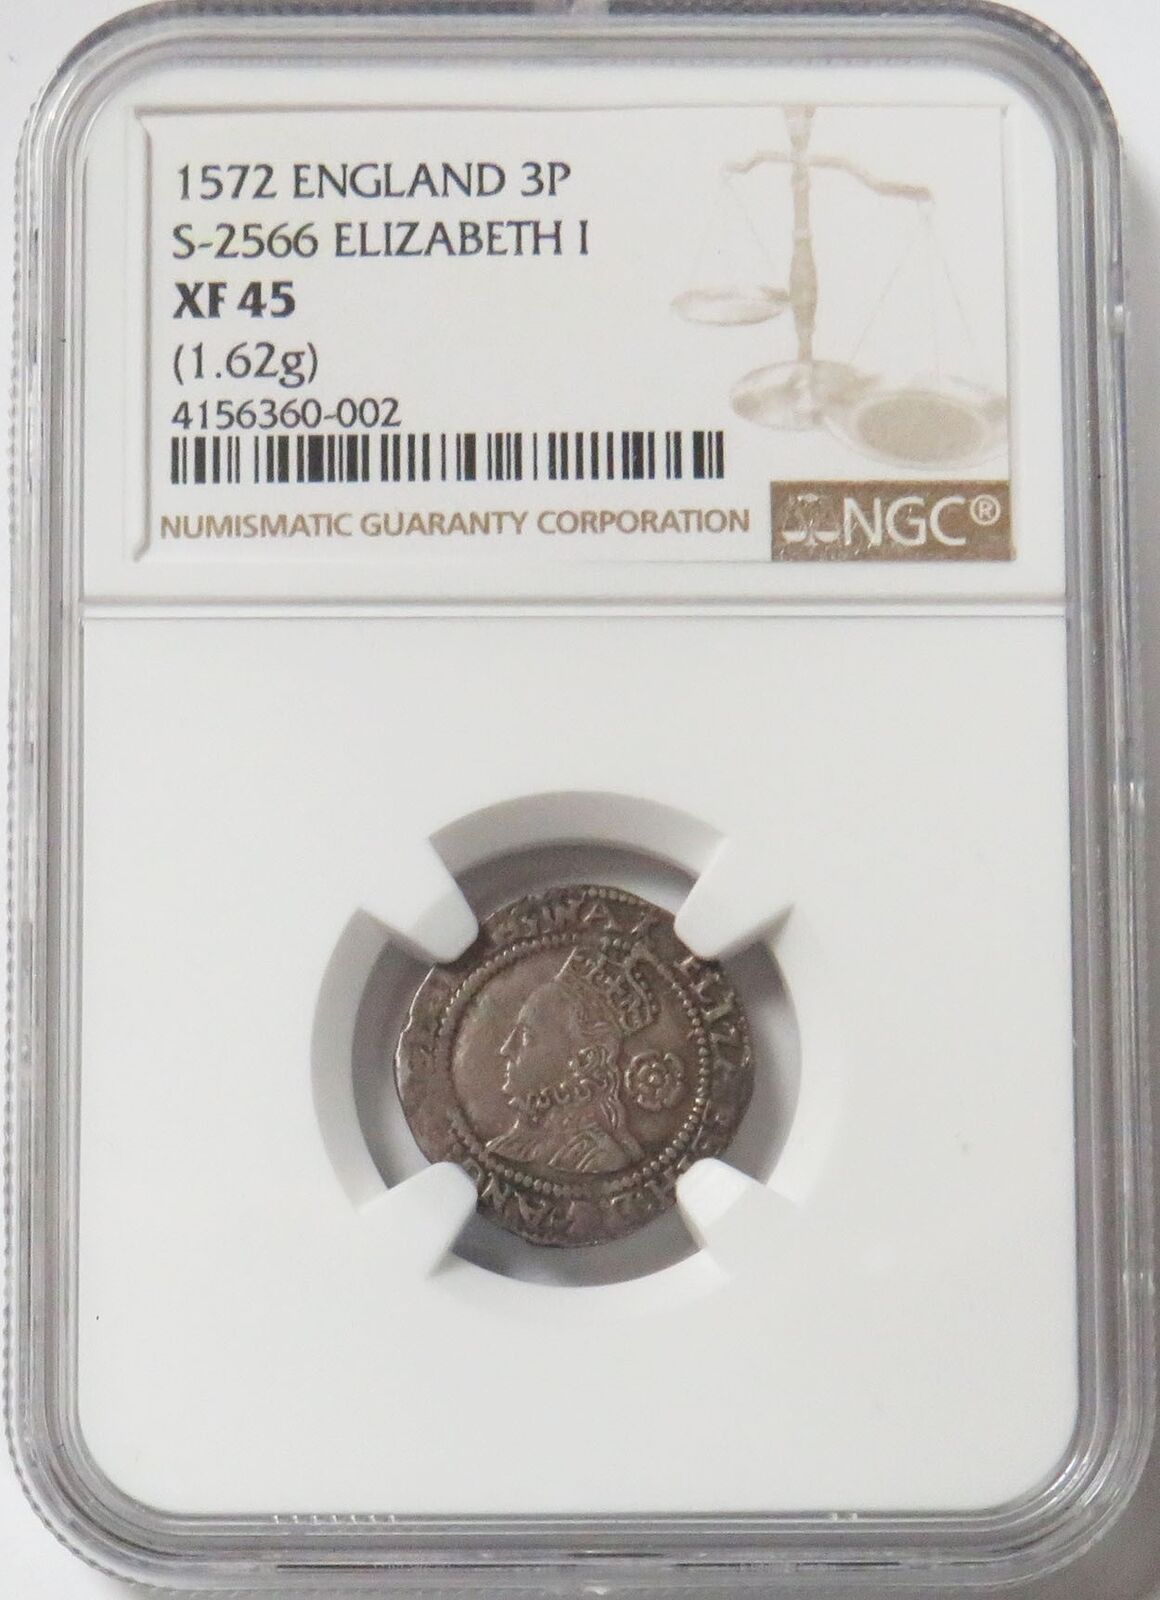 1572 England 3 Pence Elizabeth I Coin S-2566 Ngc Extremely Fine 45 Top Pop